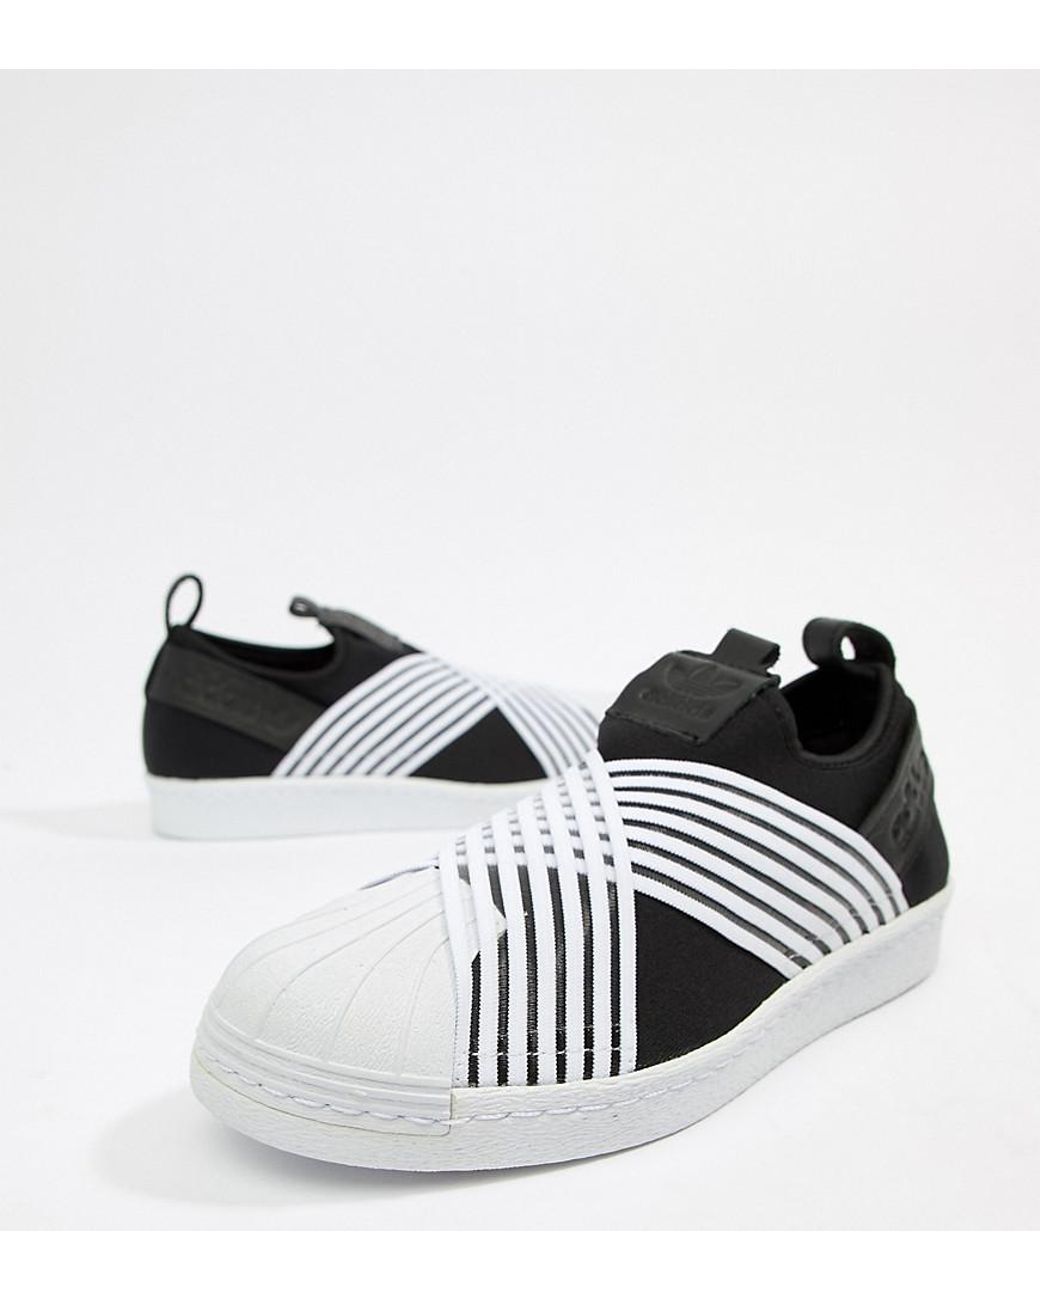 adidas Originals Superstar Slip On Sneakers In Black And White | Lyst